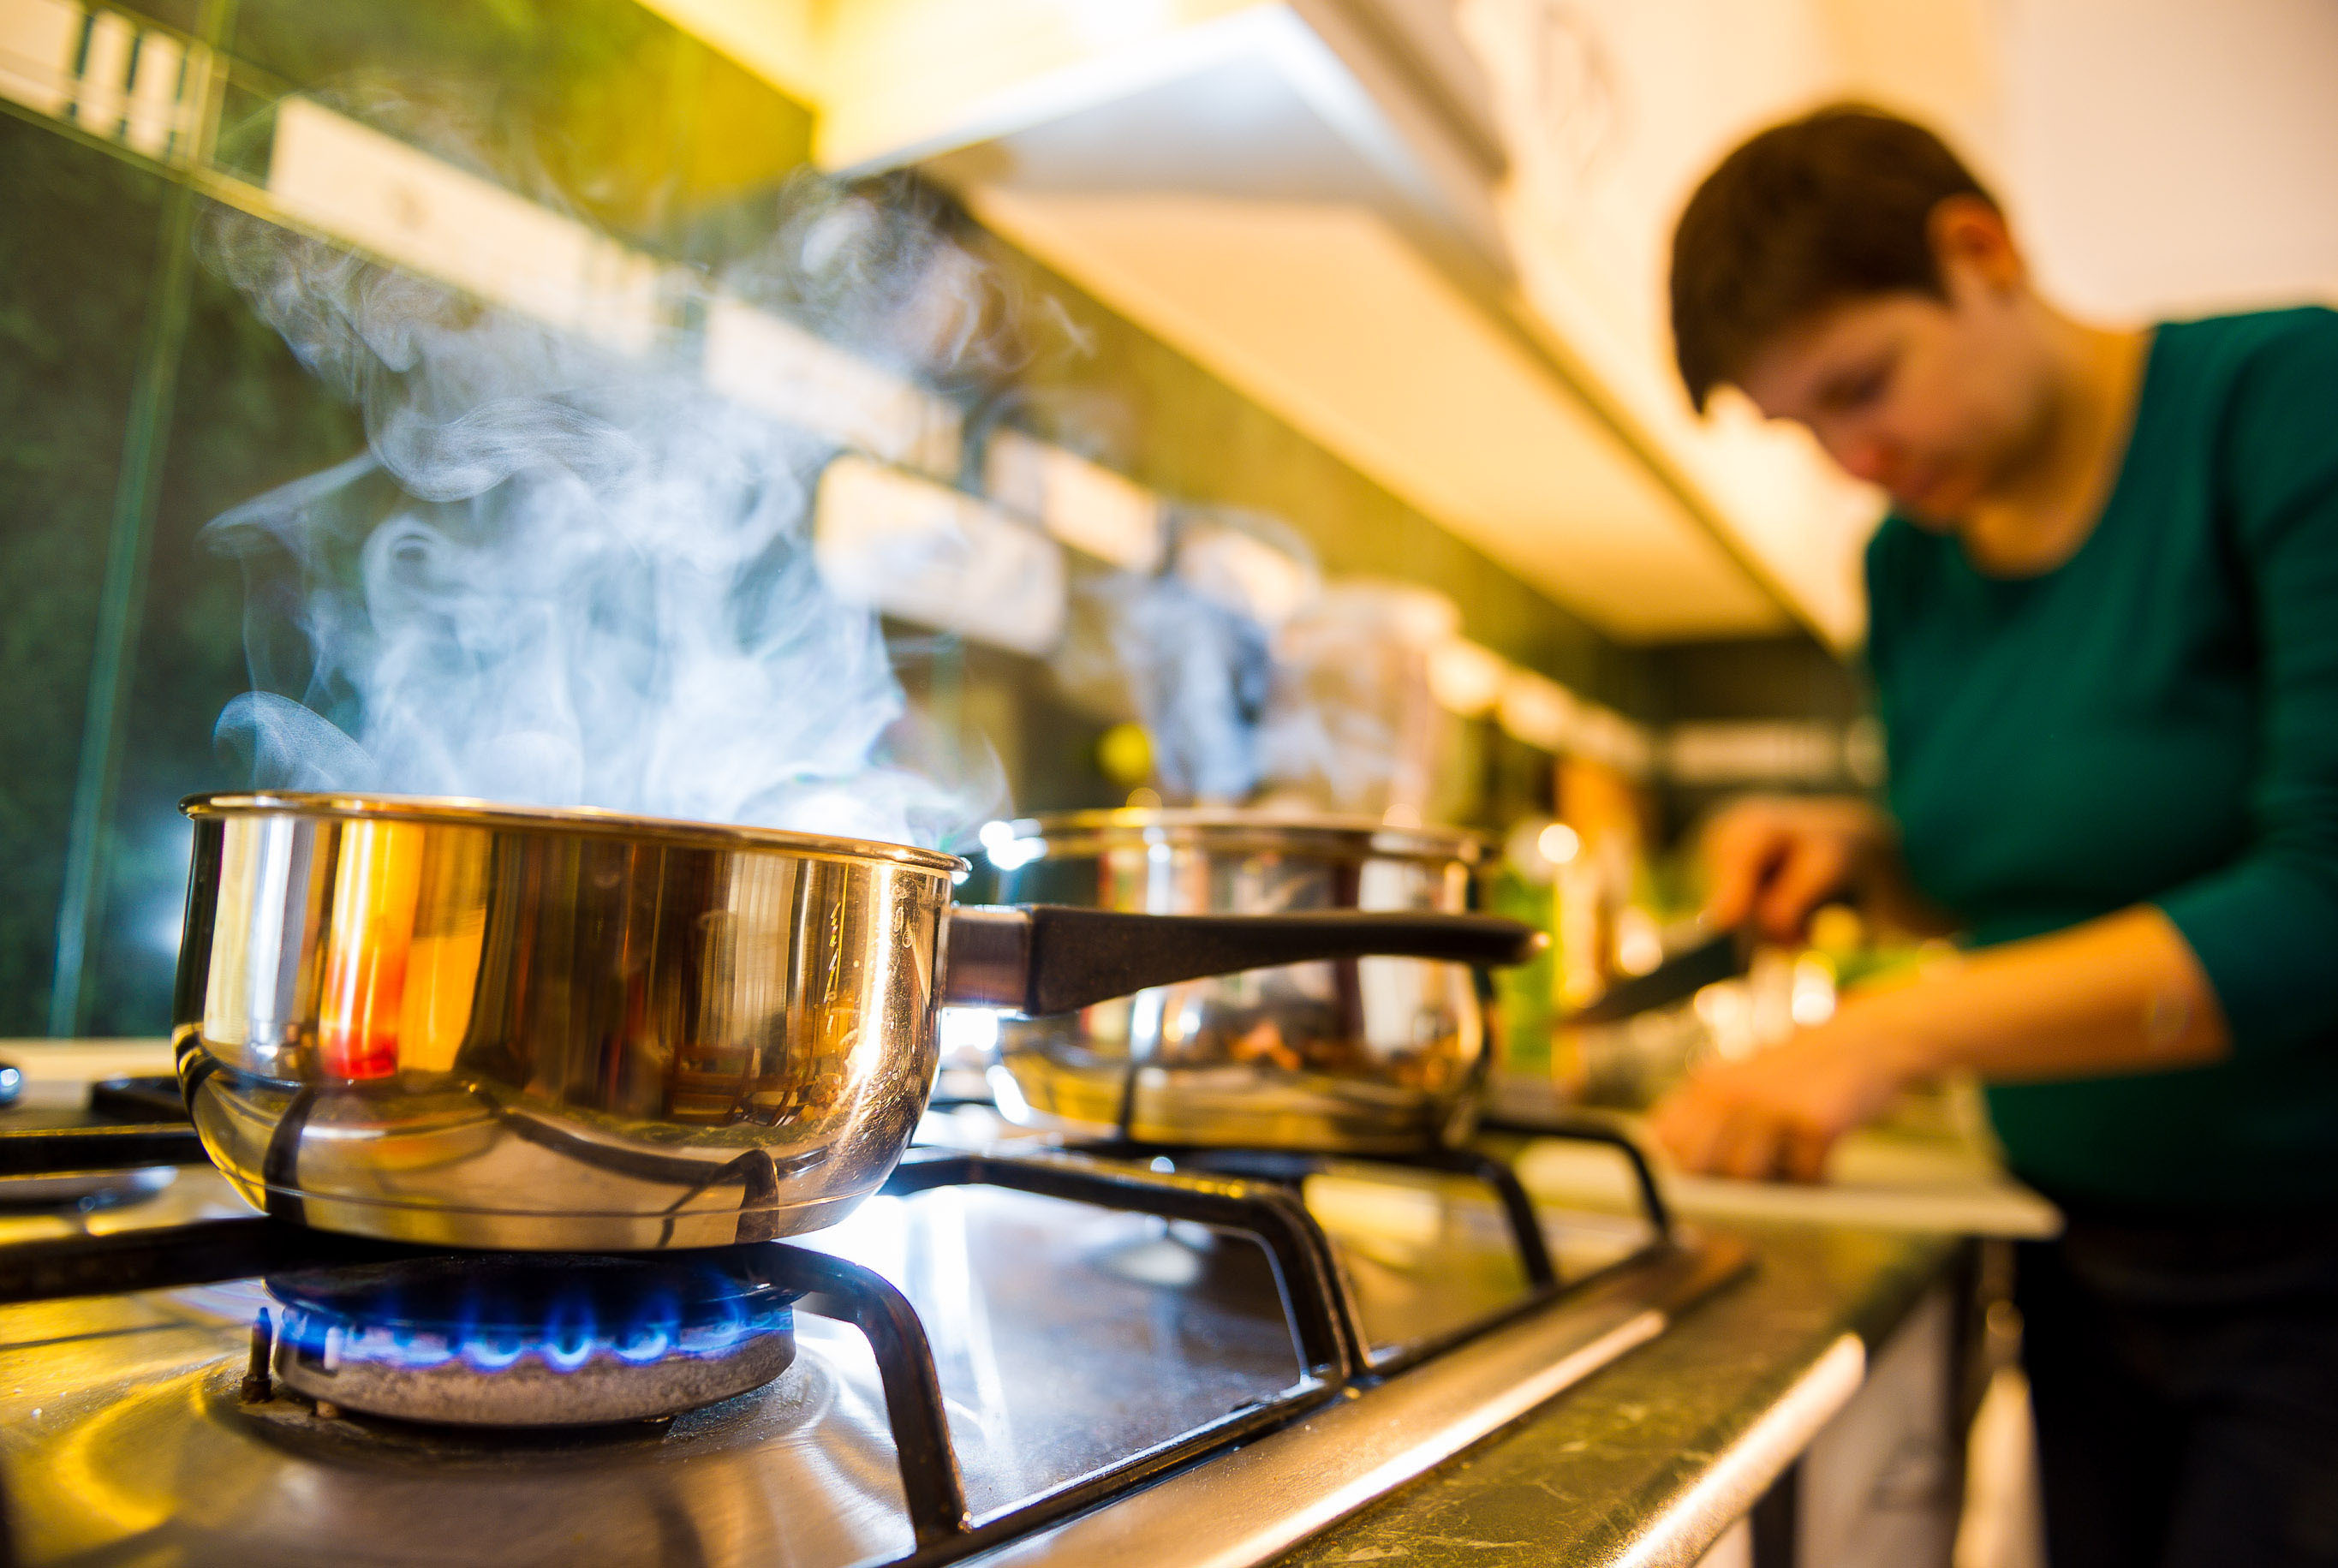 What to do if you're worried about your gas stove